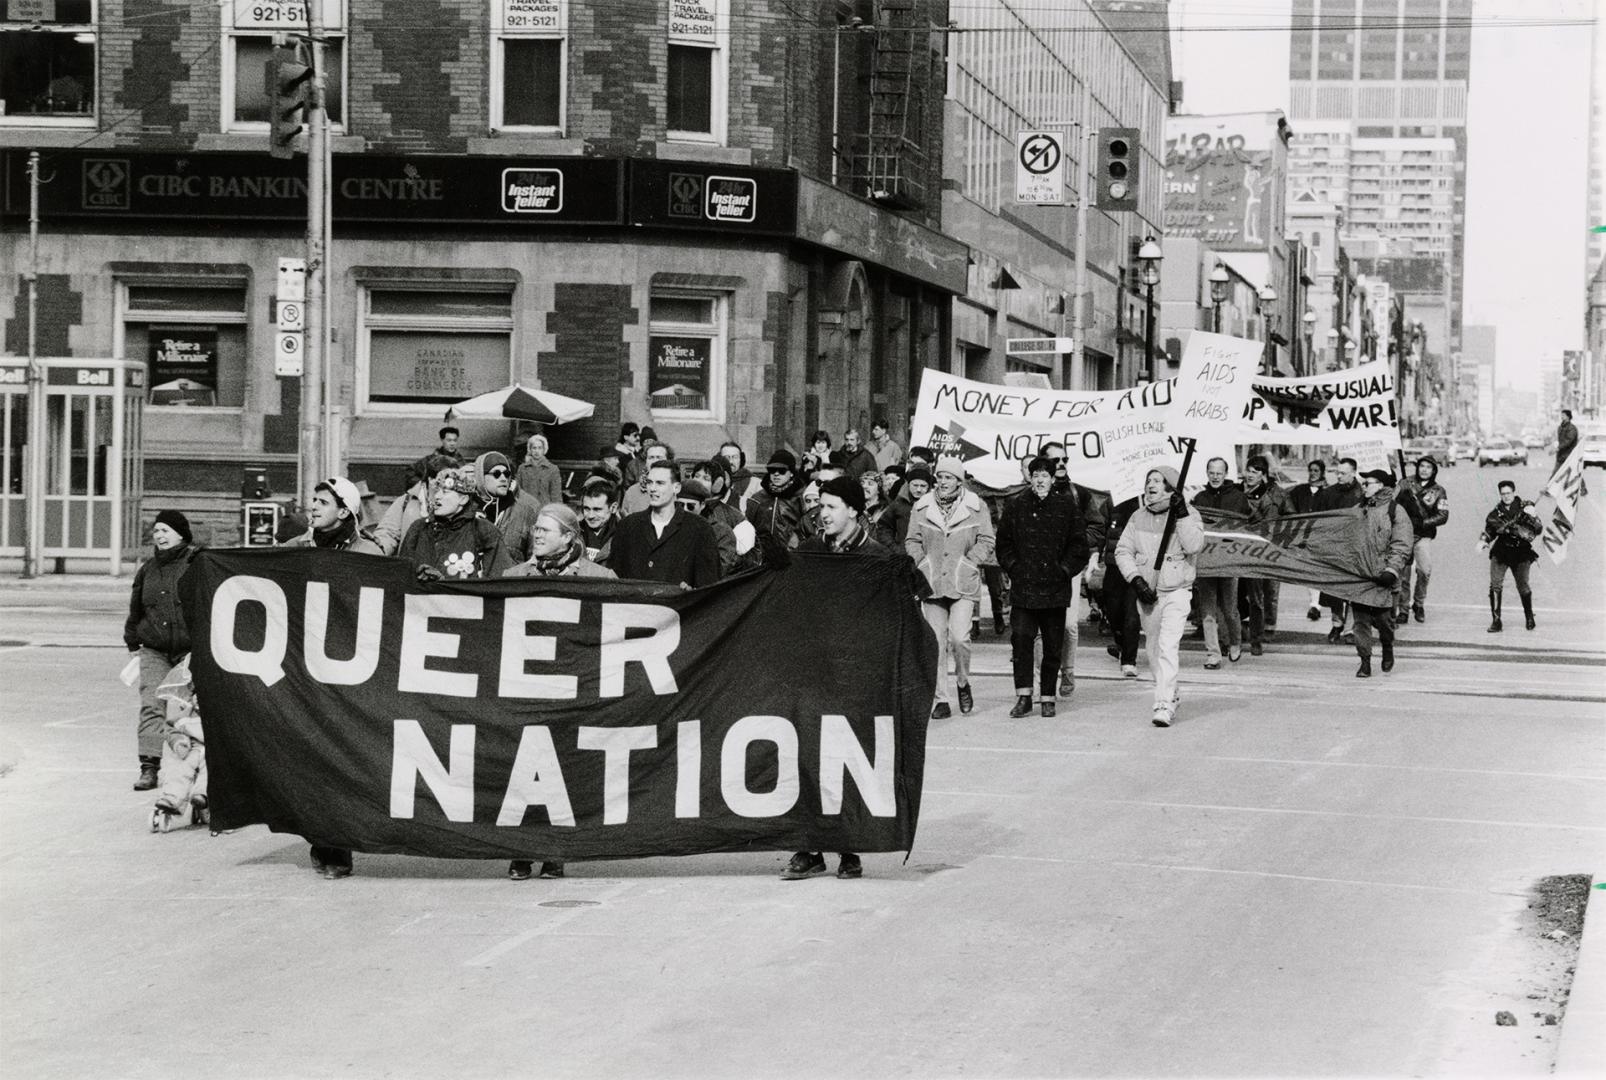 Claiming dignity: Queer Nation, which held an anti-war demonstration in downtown Toronto on Saturday, is part of a new wave of gay activists